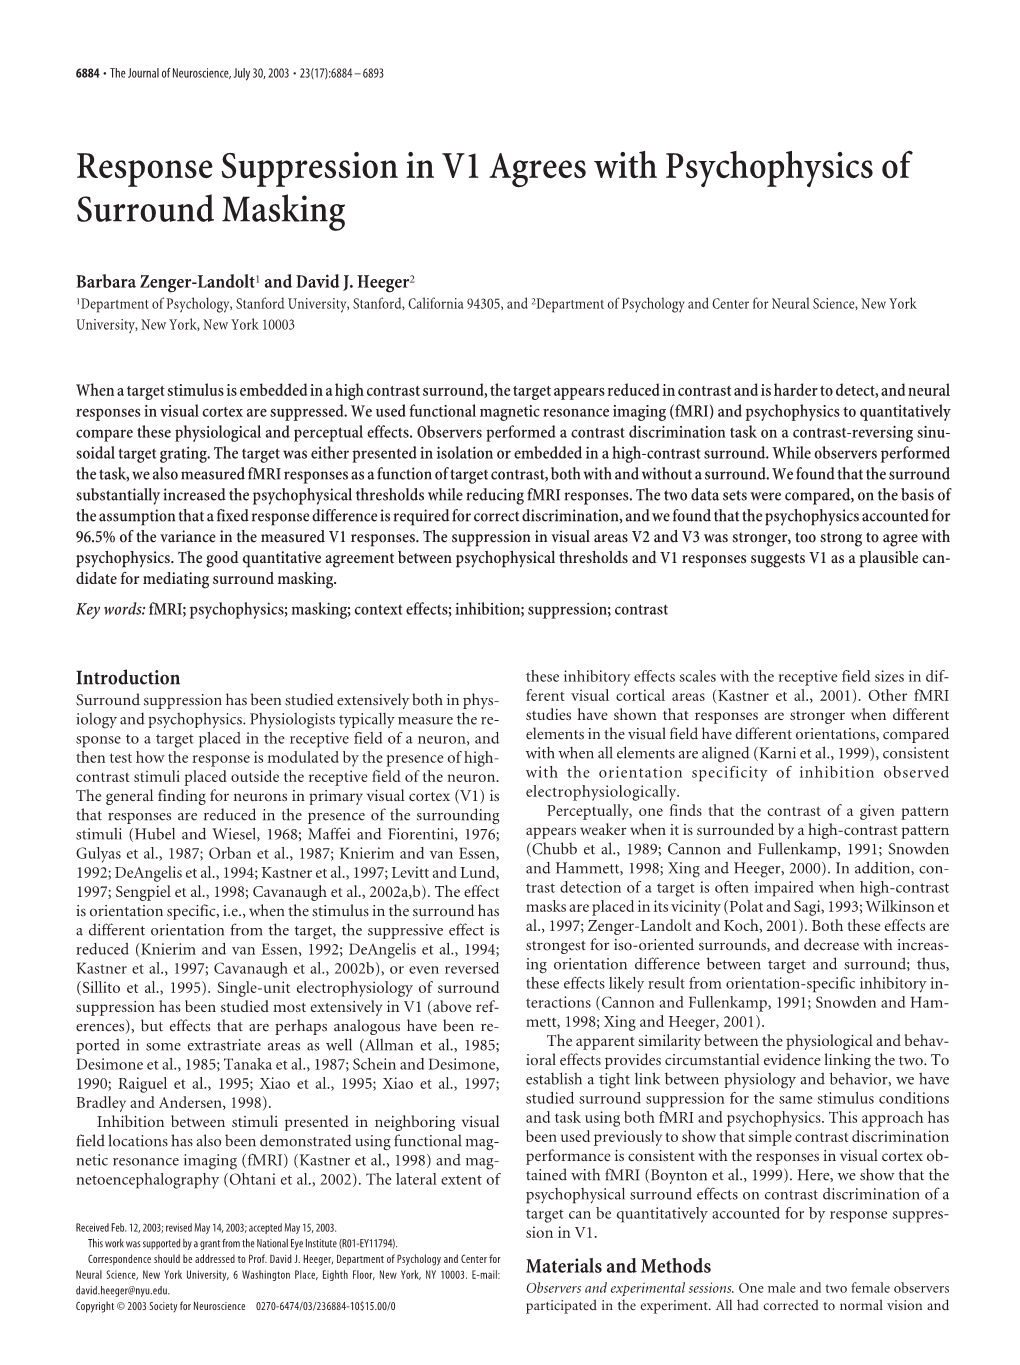 Response Suppression in V1 Agrees with Psychophysics of Surround Masking